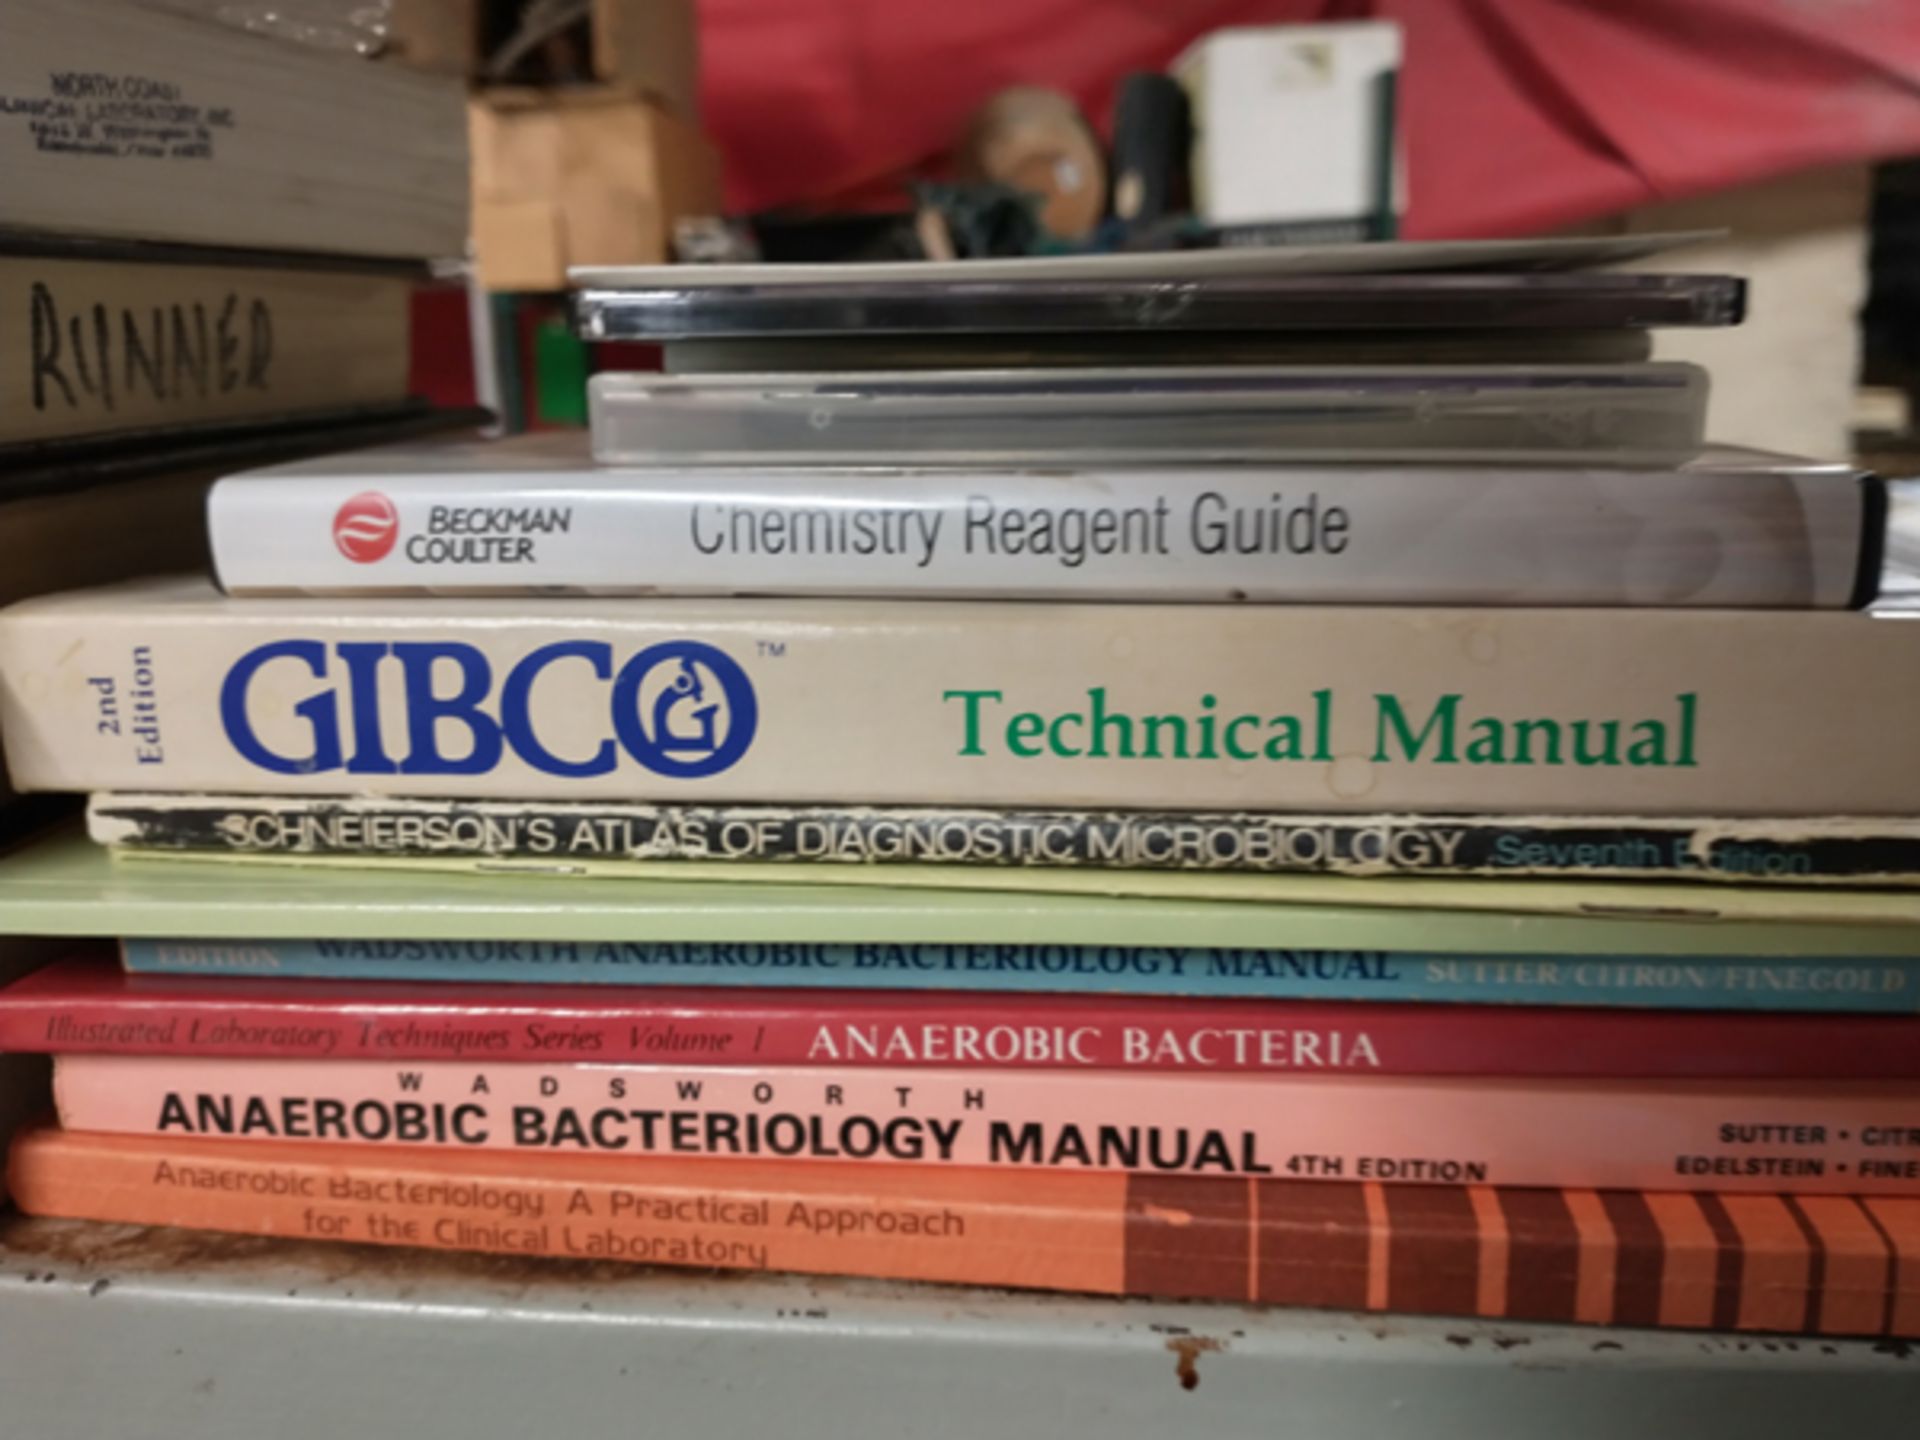 LOT OF MEDICAL BOOKS AND MICROSCOPE SLIDES - Image 4 of 6